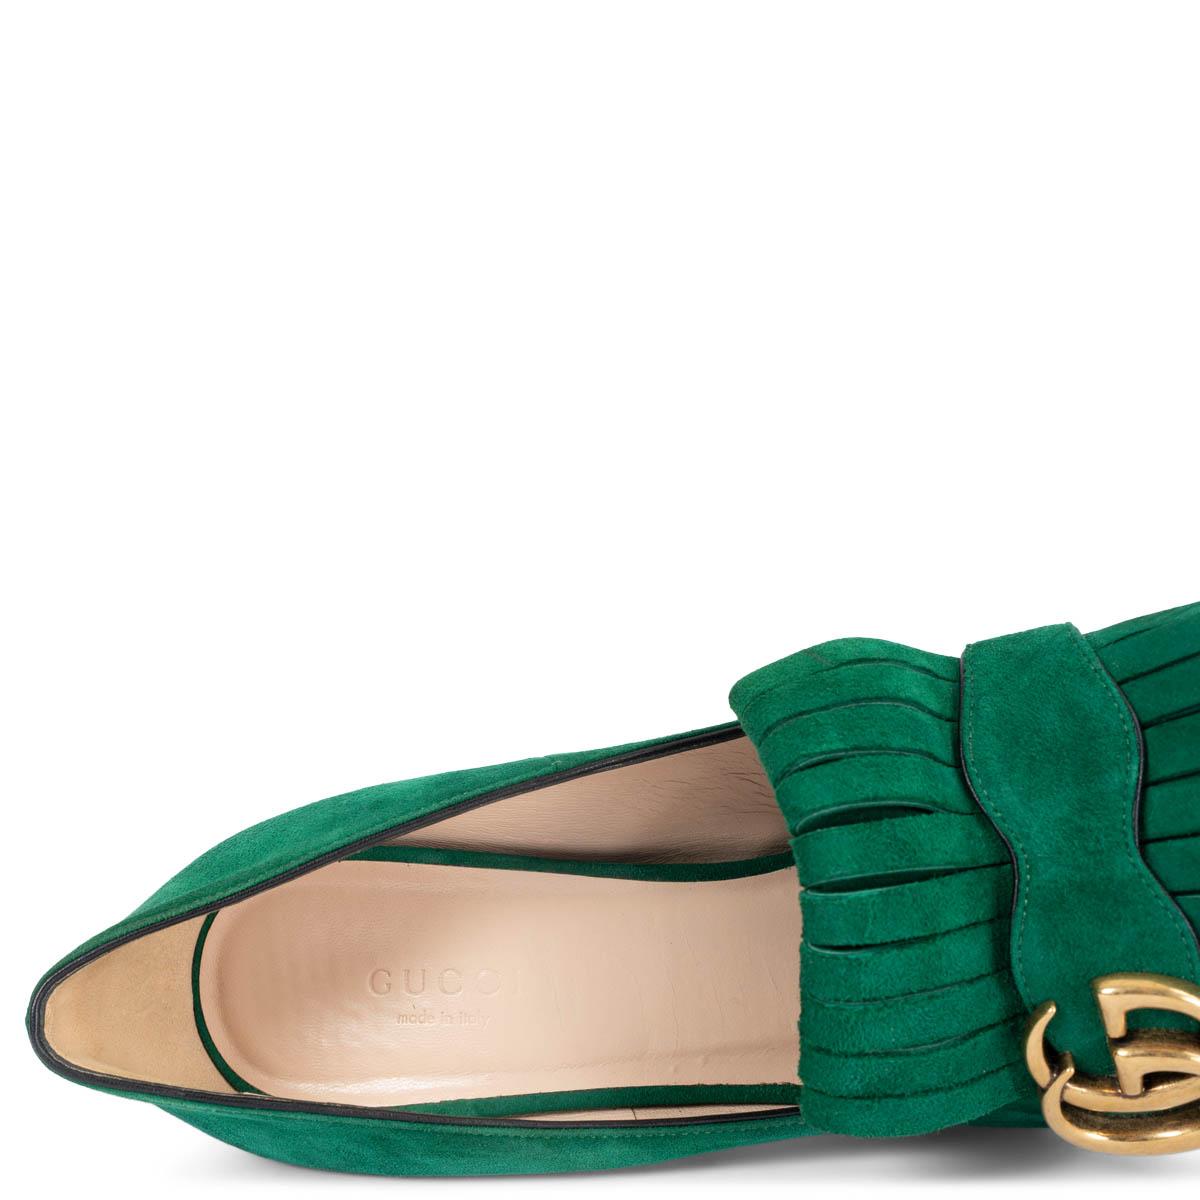 GUCCI emerald green suede GG MARMONT 105 FRINGE Pumps Shoes 38.5 2